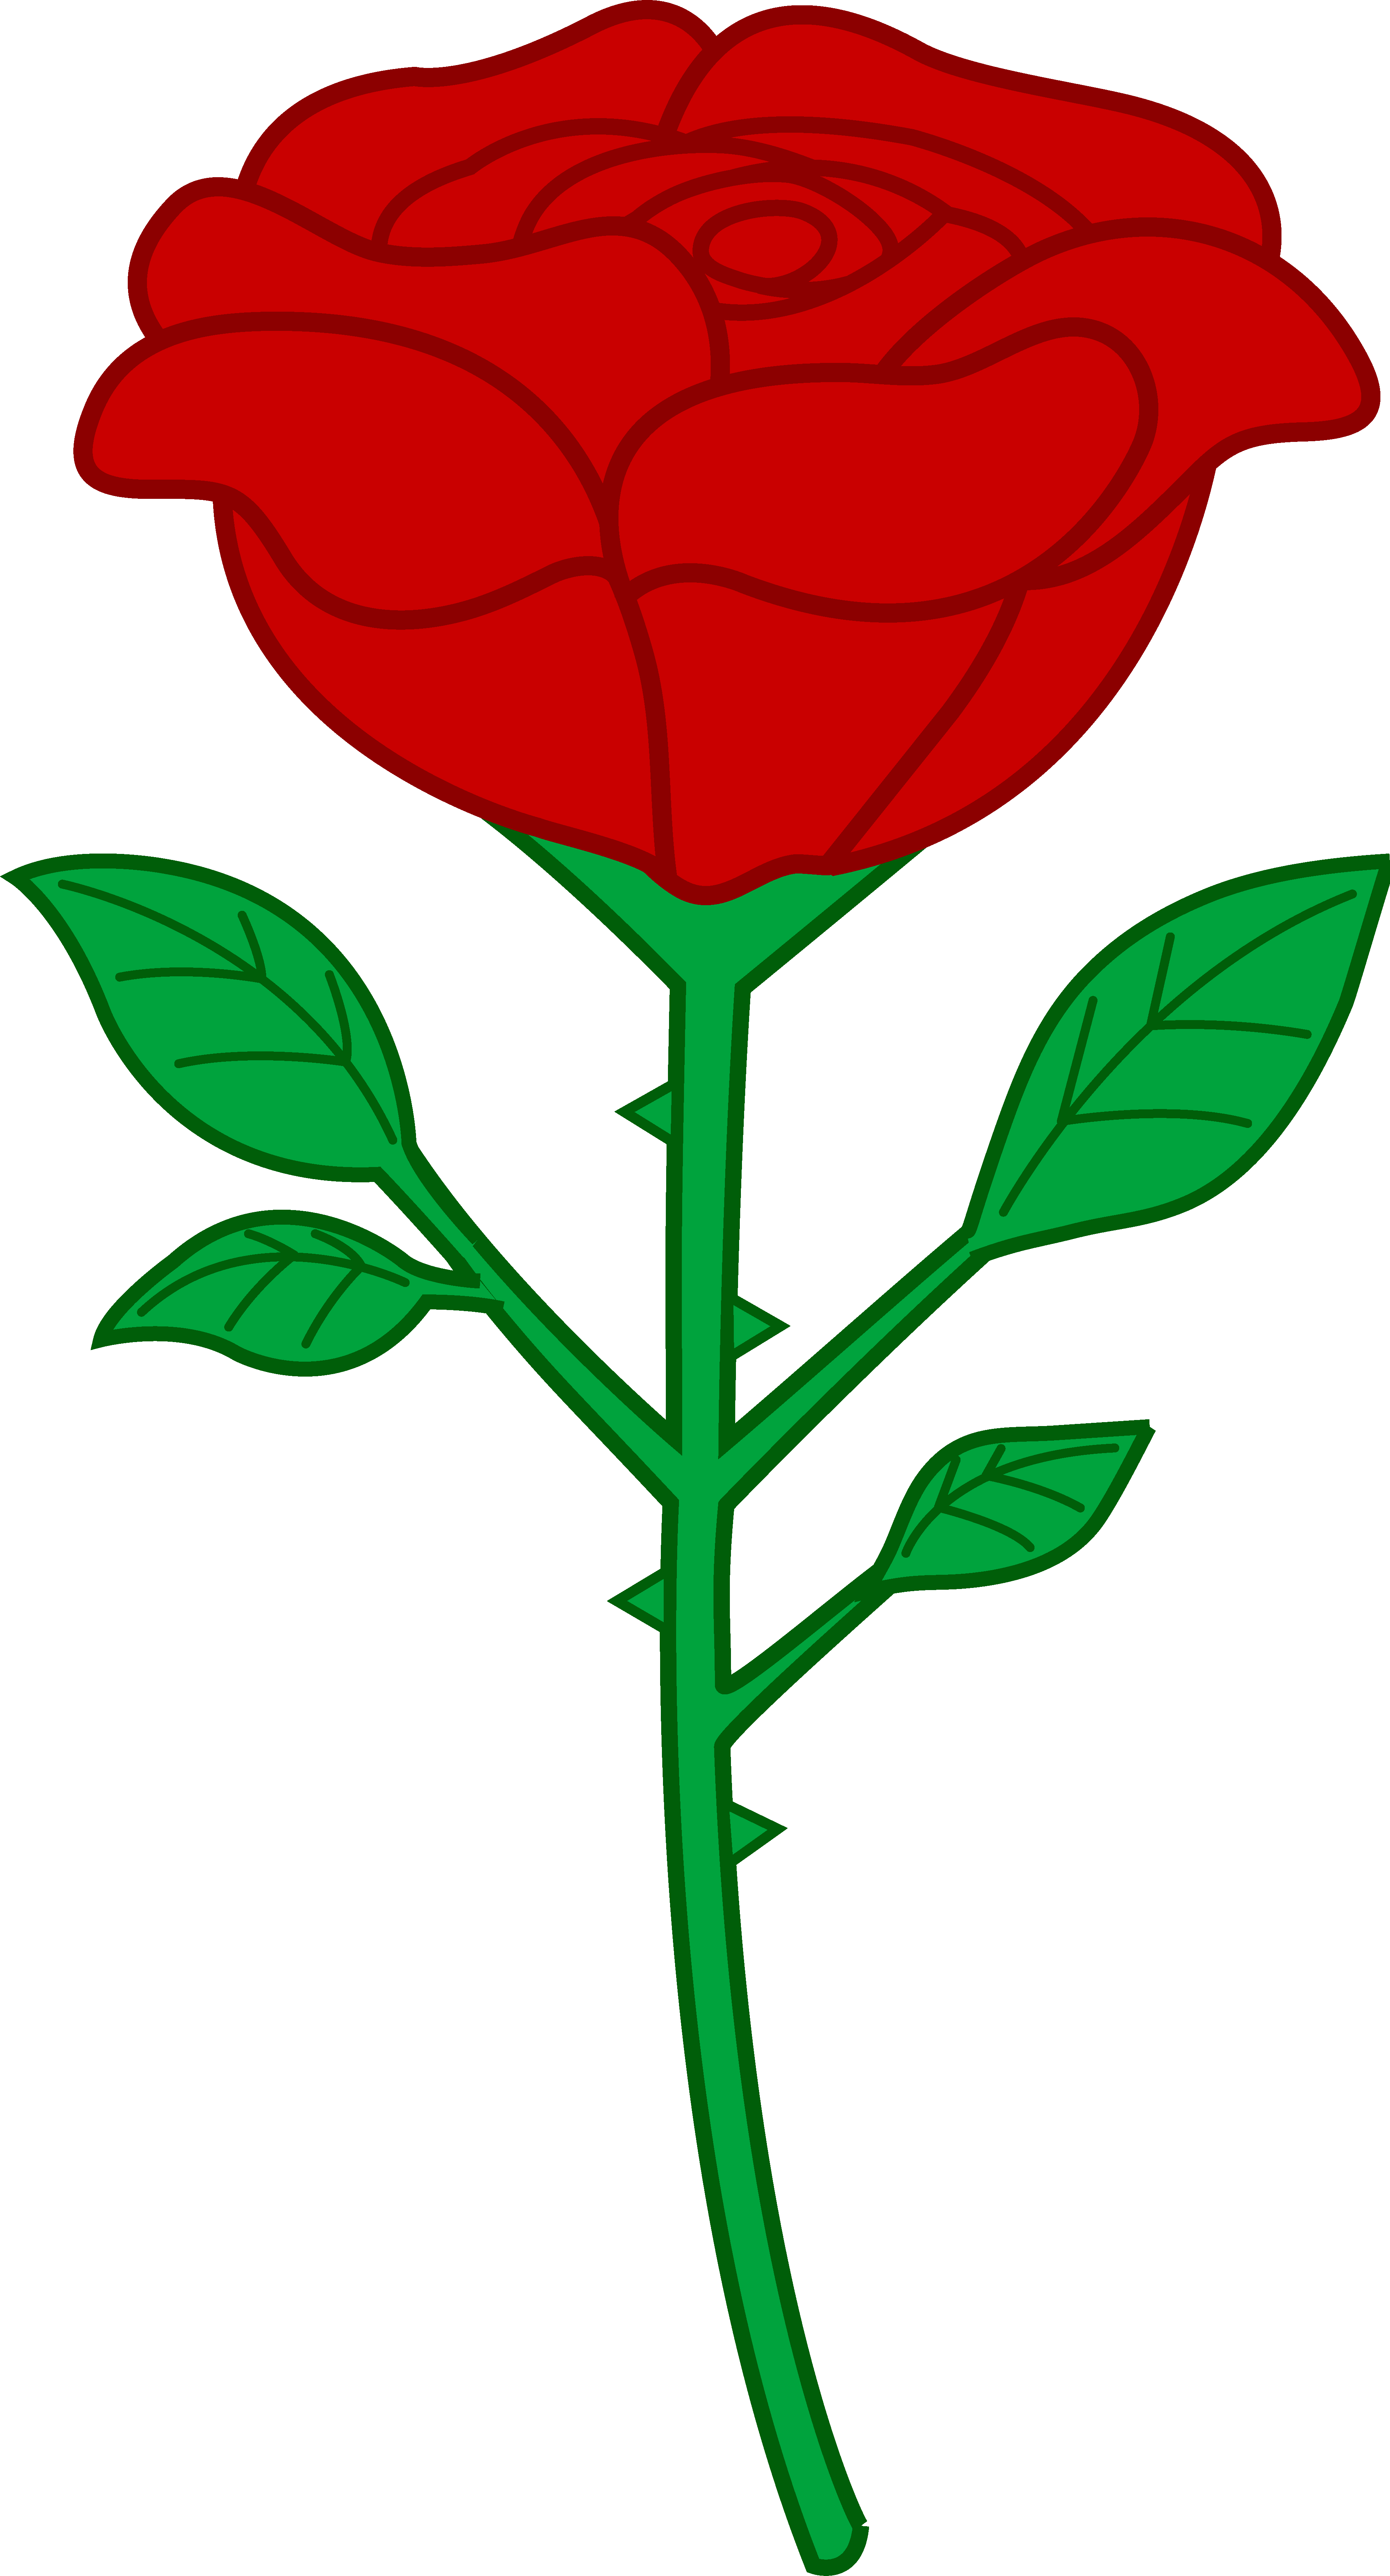 Red rose outline clipart png